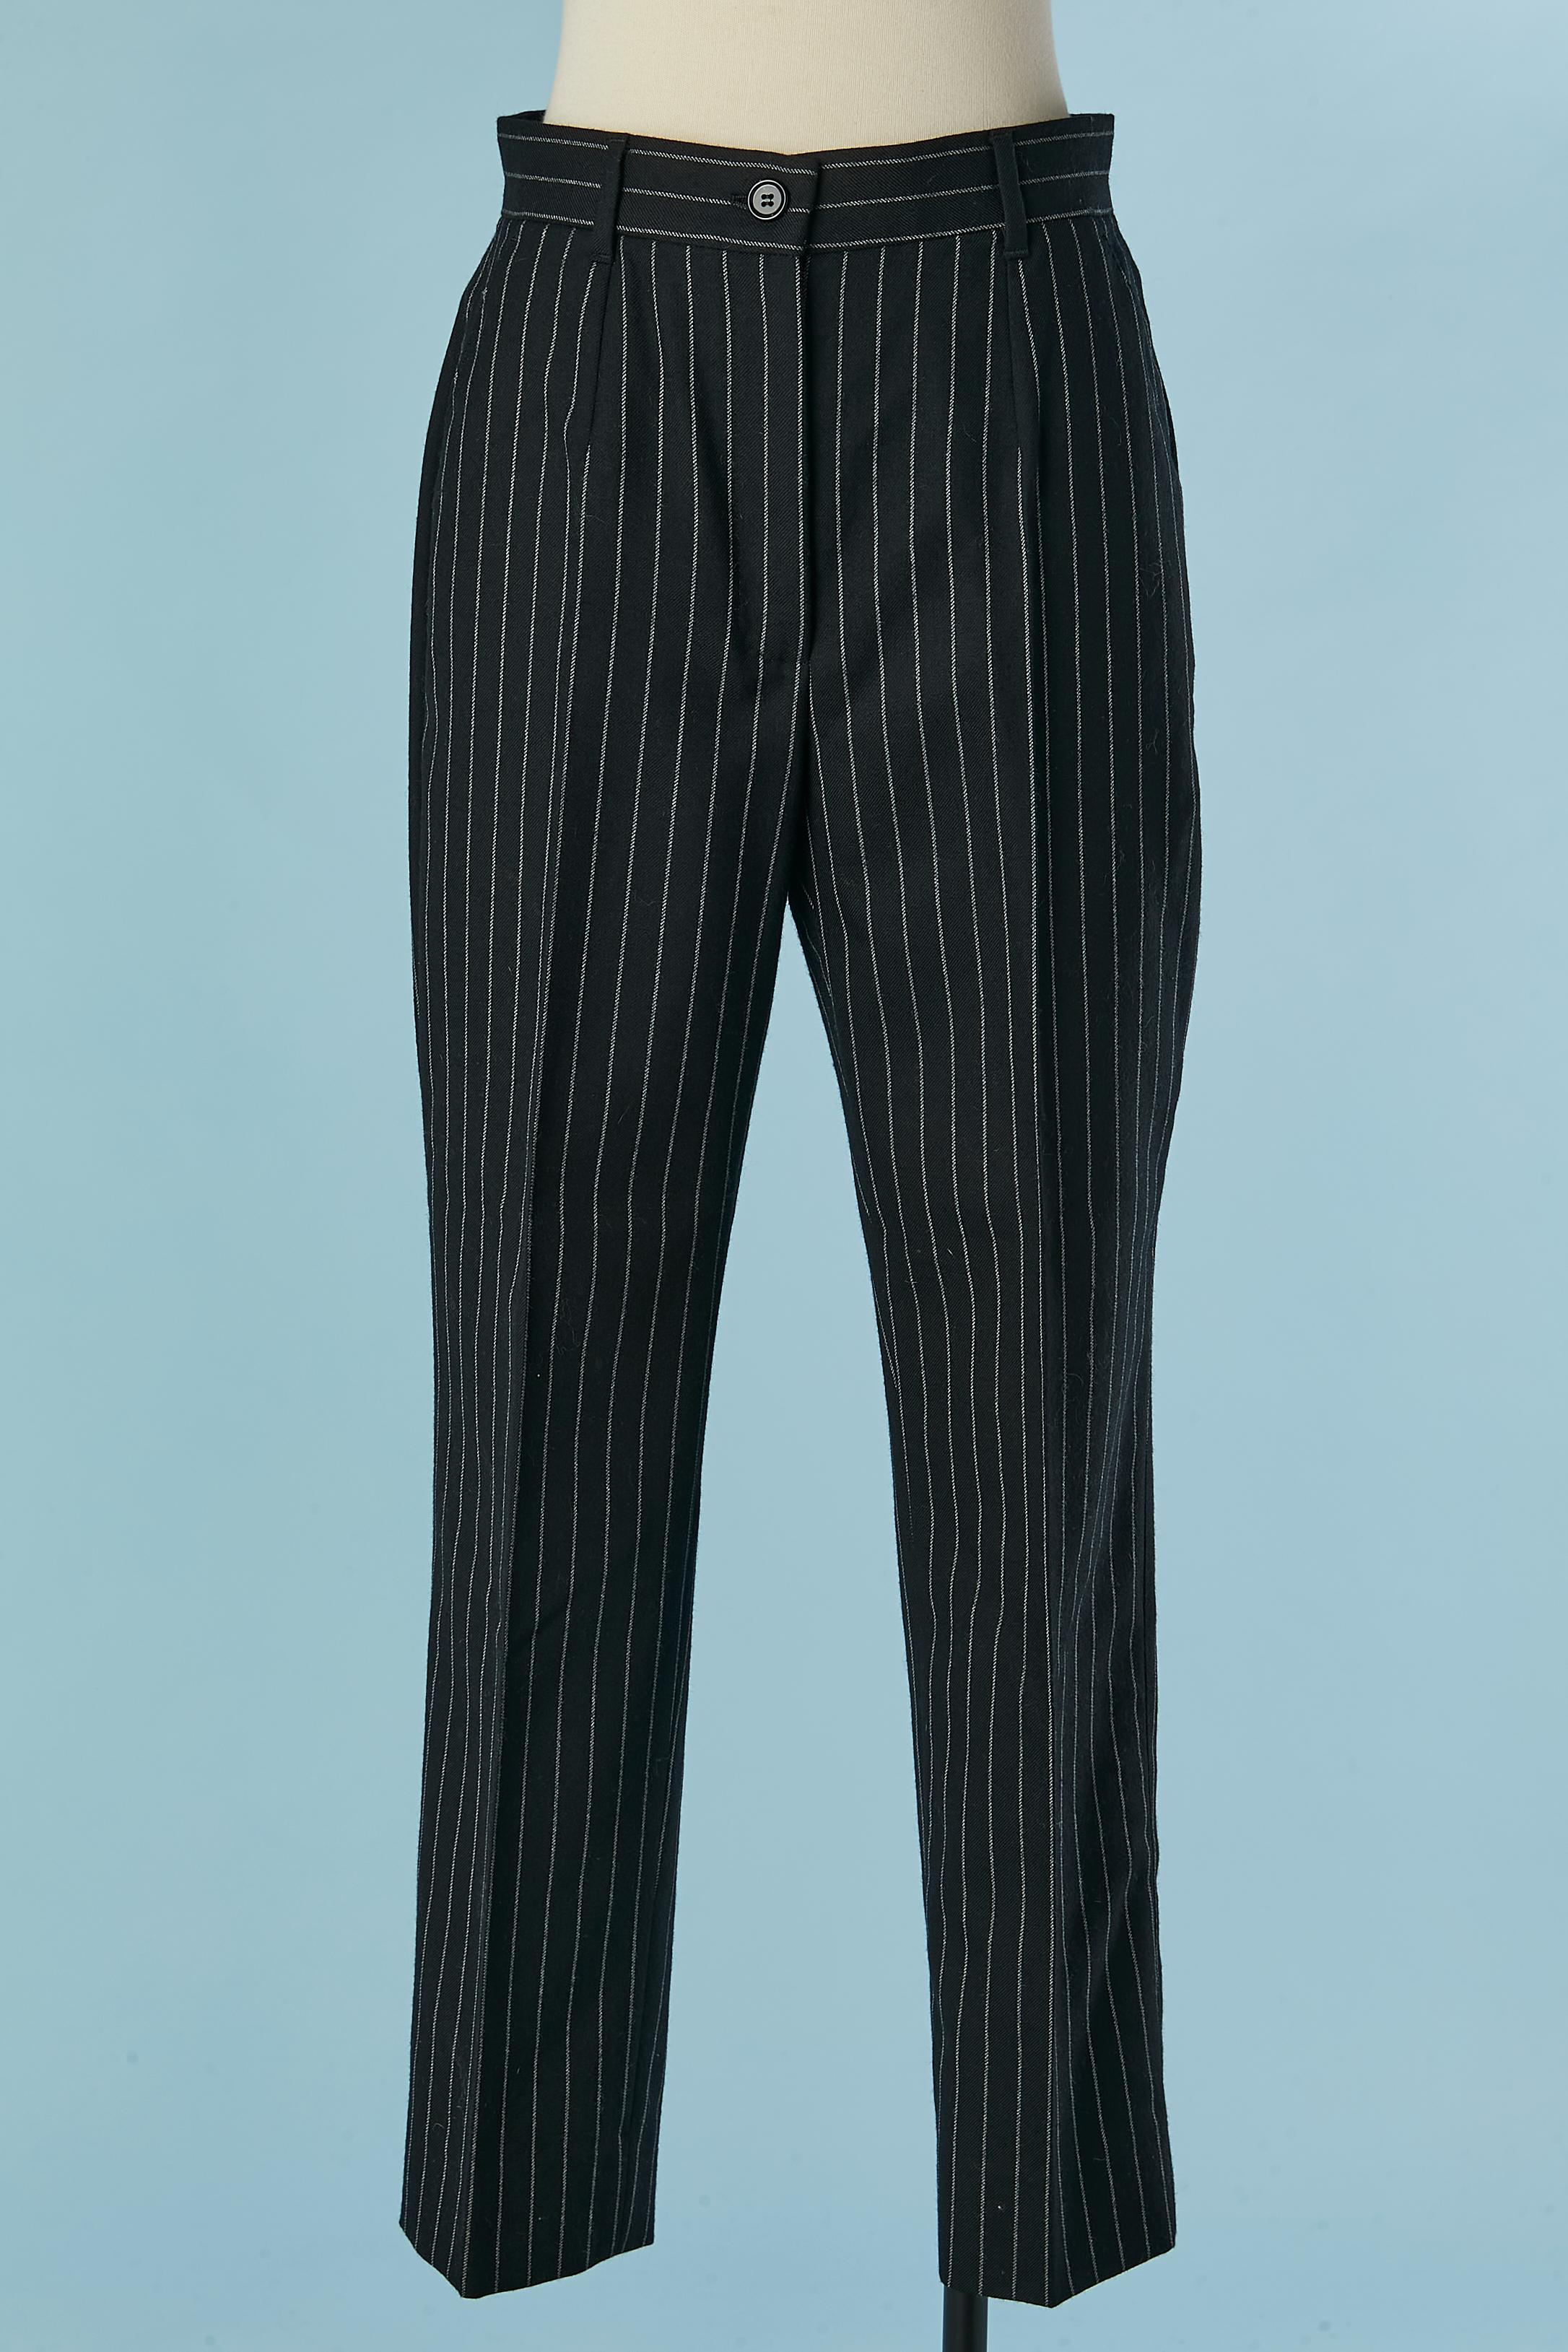 Black and white pin-striped trousers-suit Dolce & Gabbana  3